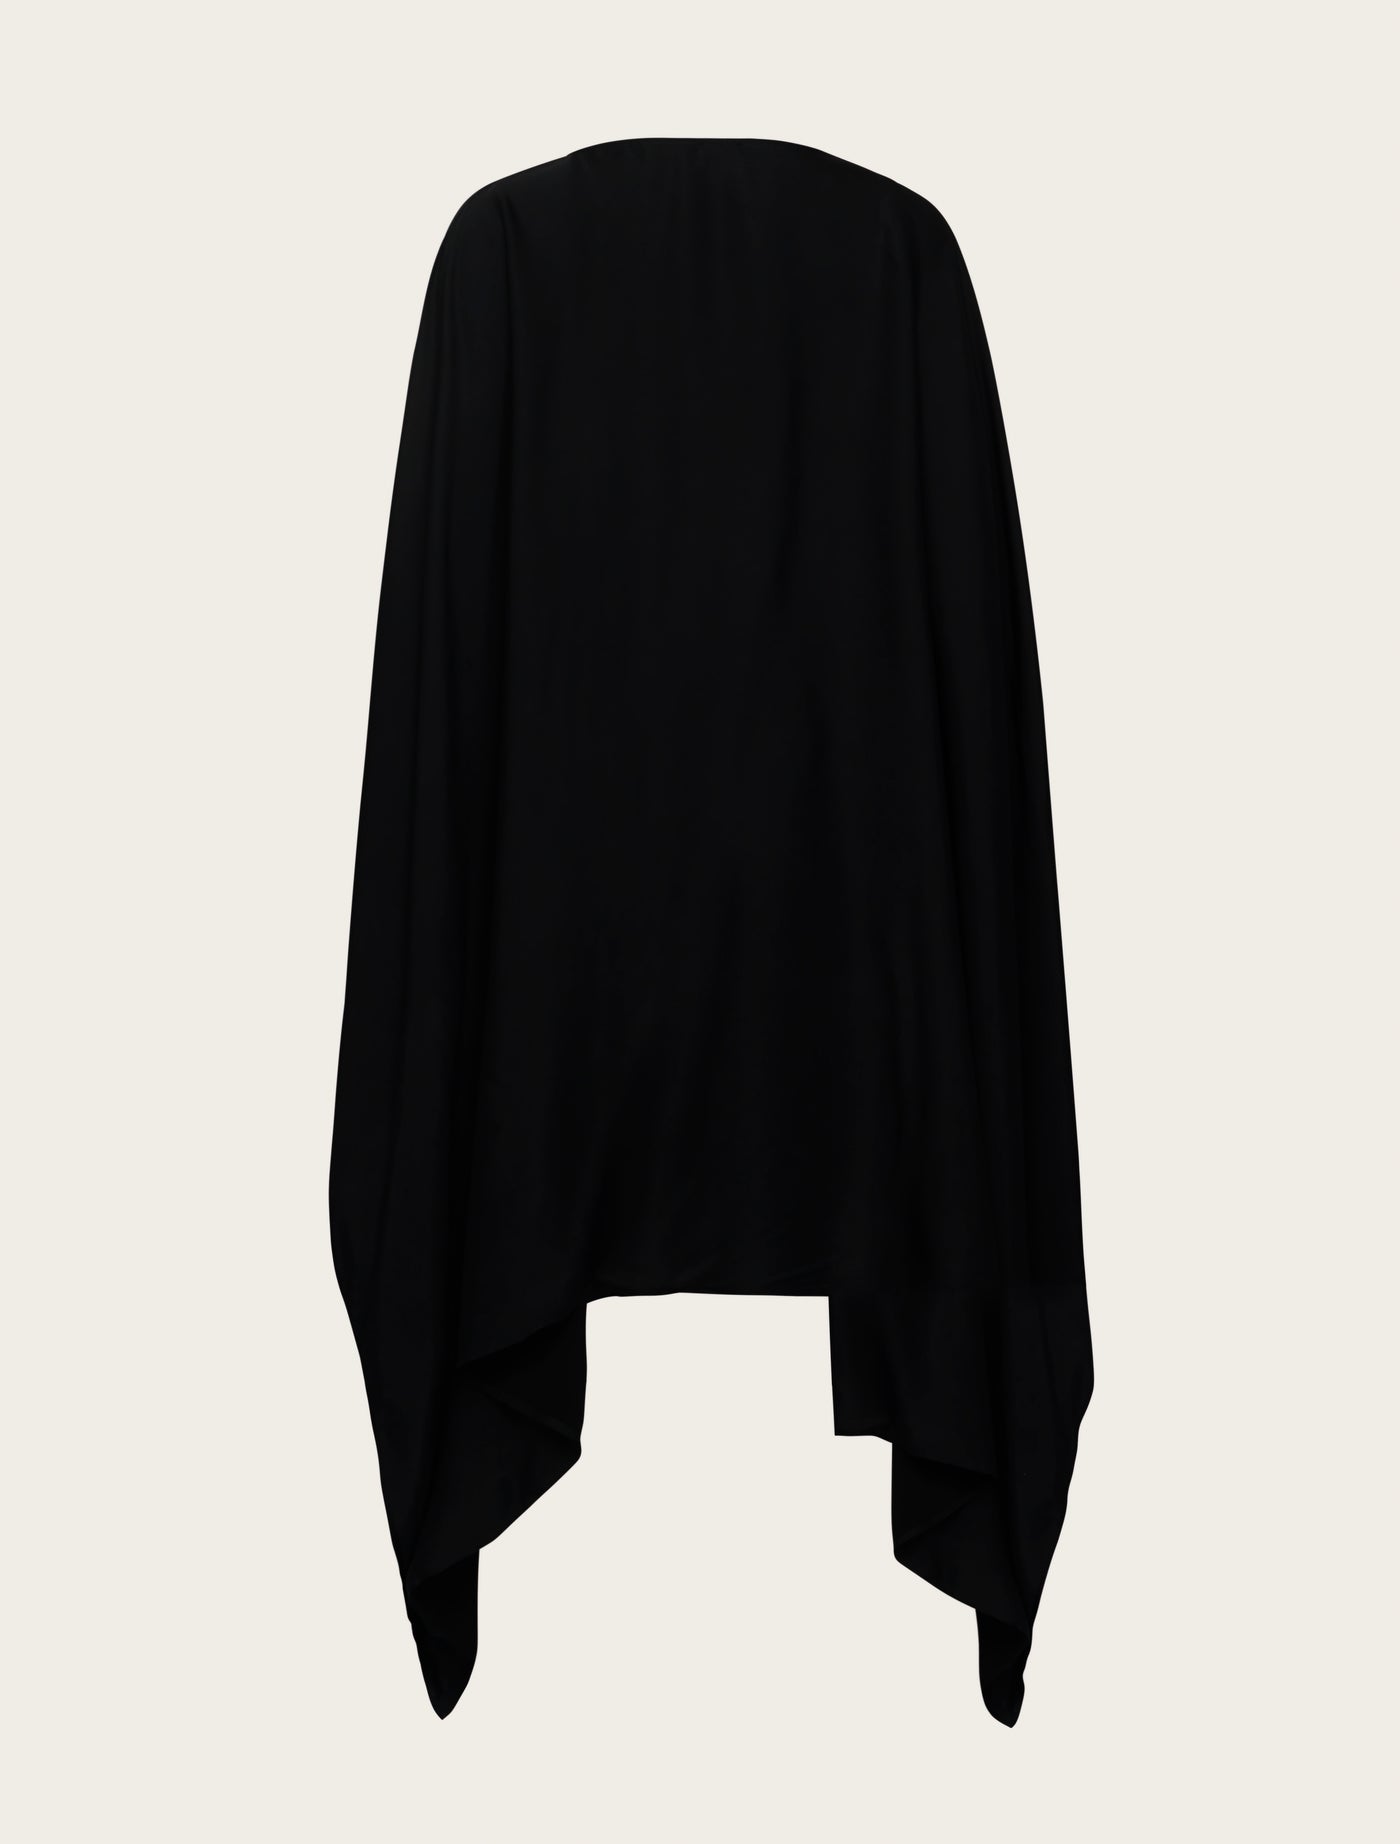 Phylo Poncho in Obsidian